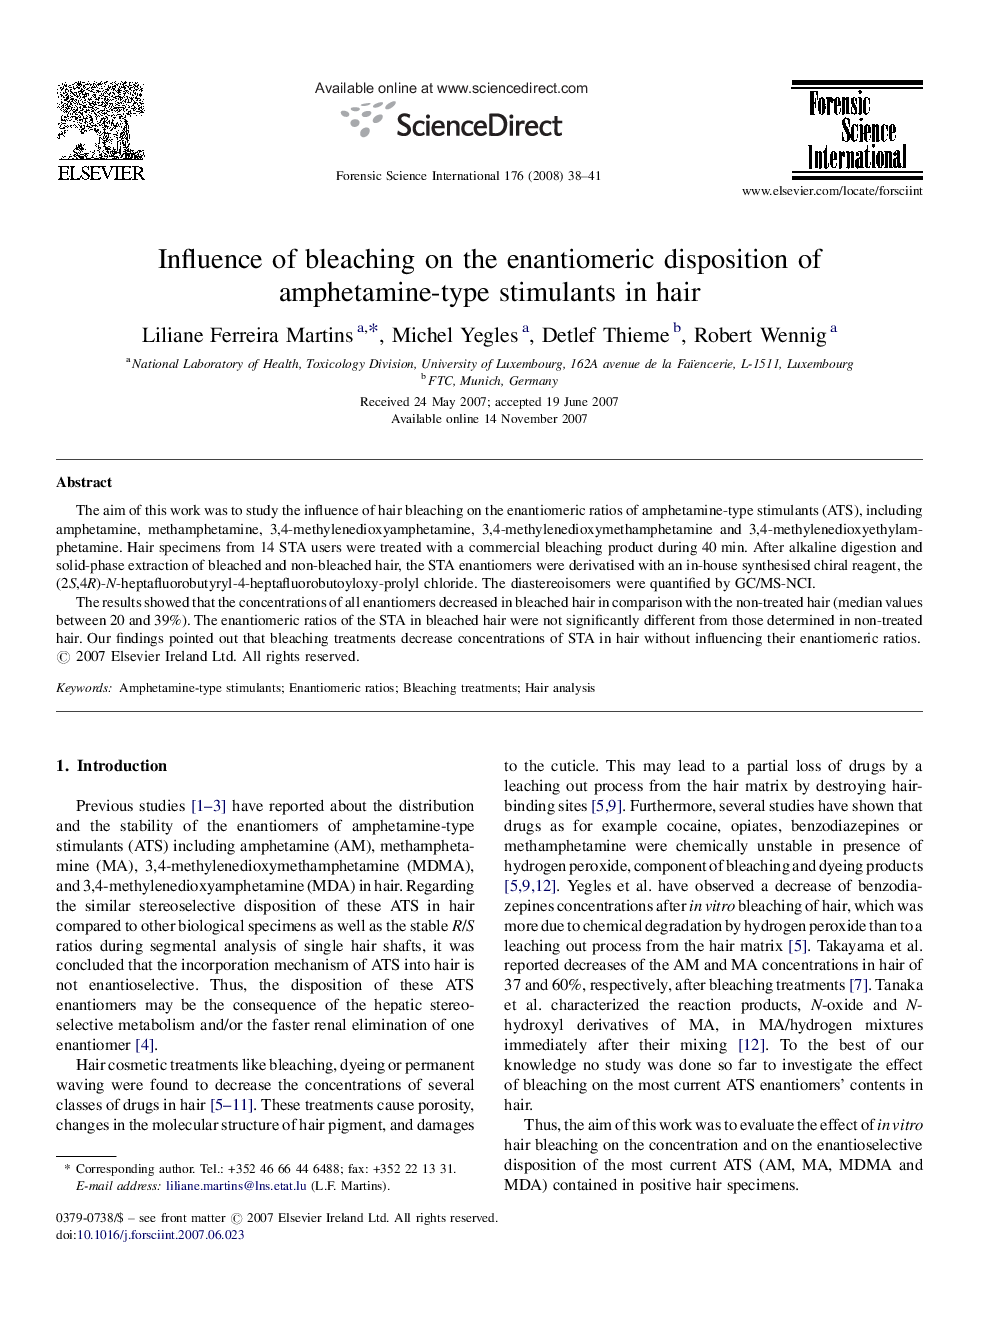 Influence of bleaching on the enantiomeric disposition of amphetamine-type stimulants in hair